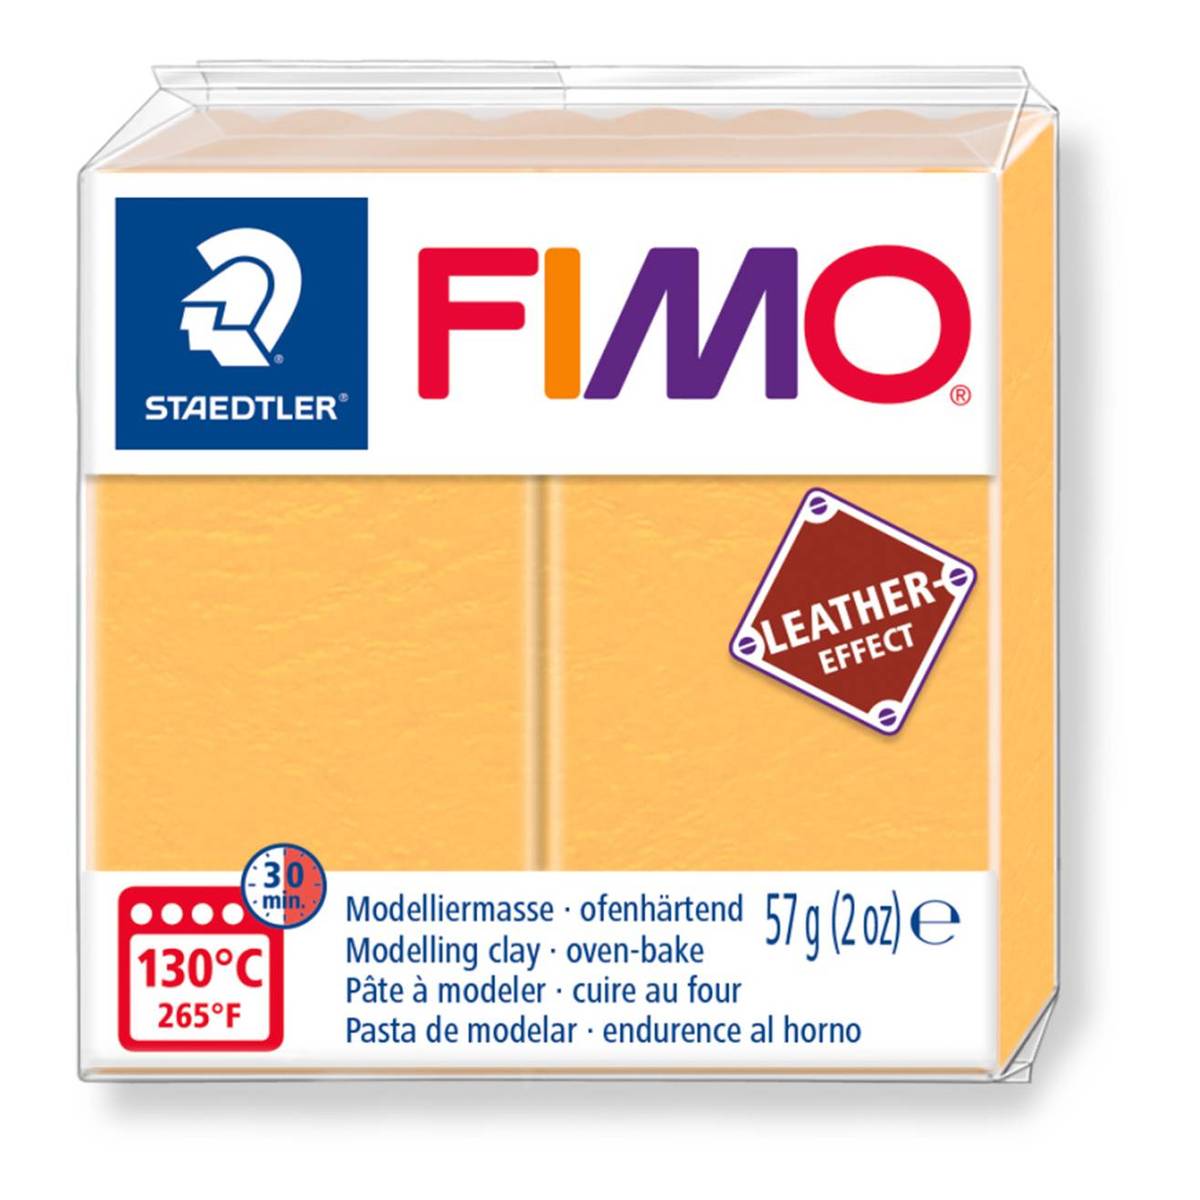 FIMO FIMO LEATHER EFFECT 57 g Polymer Clay 2 oz Choose your colour 